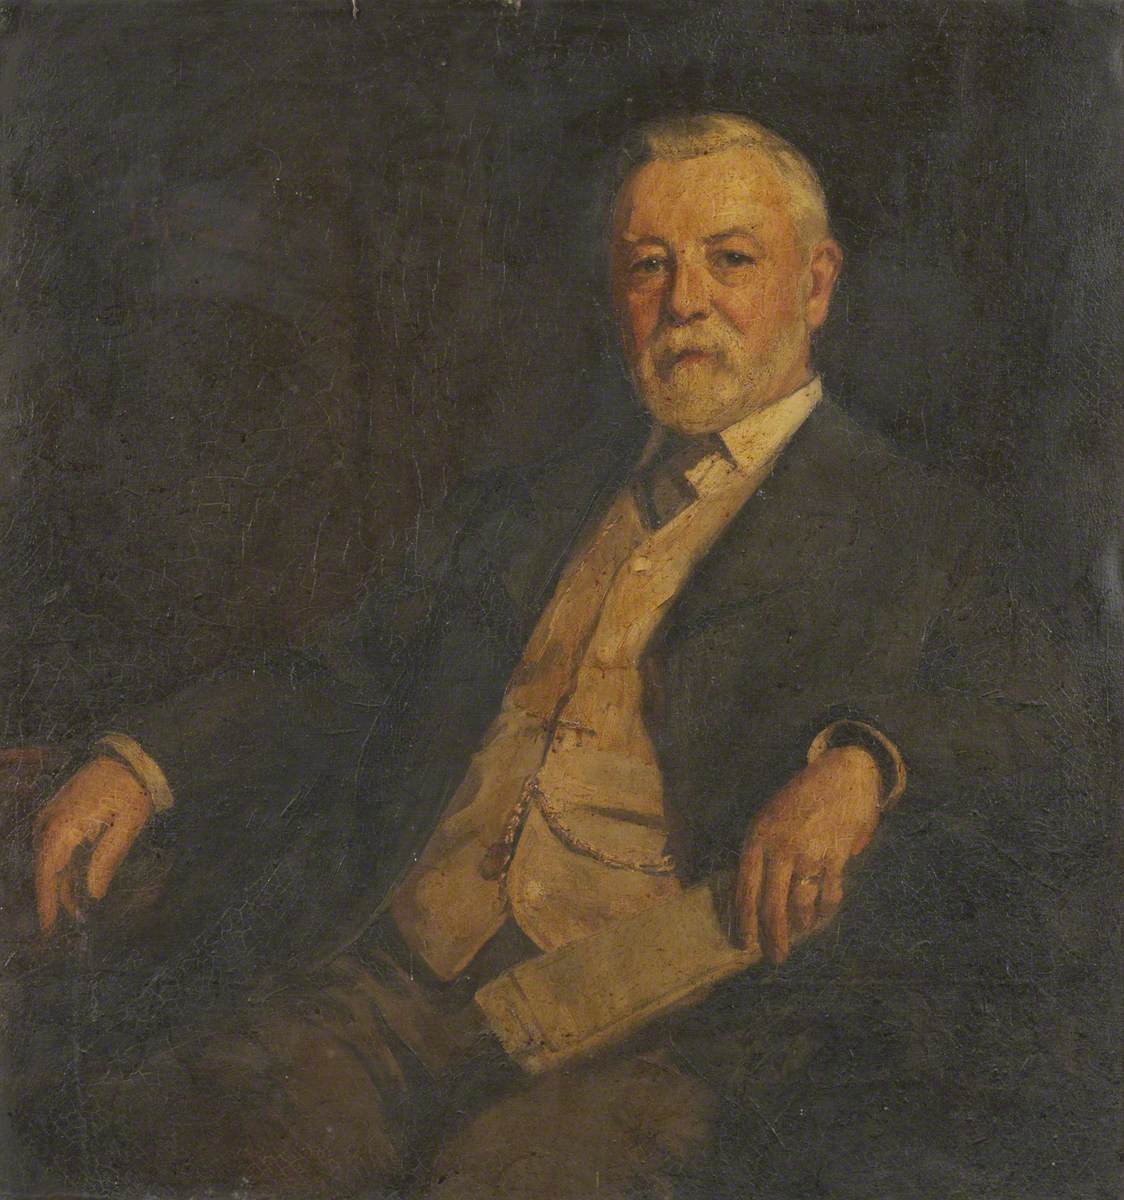 Portrait of a Man, Seated, Wearing a Black Jacket and Watch Chain